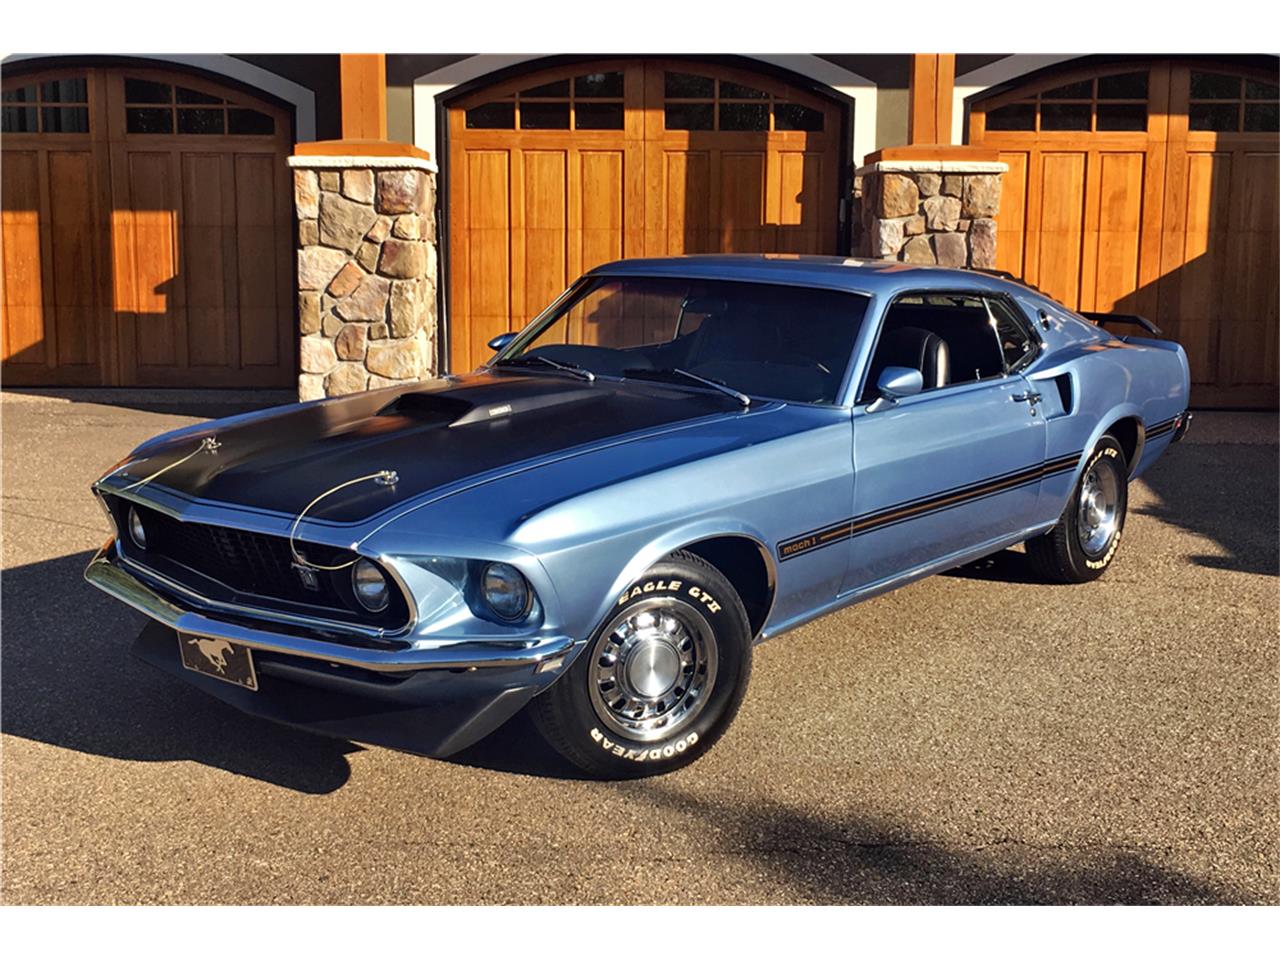 1969 Ford Mustang Mach 1 By Jill Reger Mustang Mach 1 Ford Mustang ...